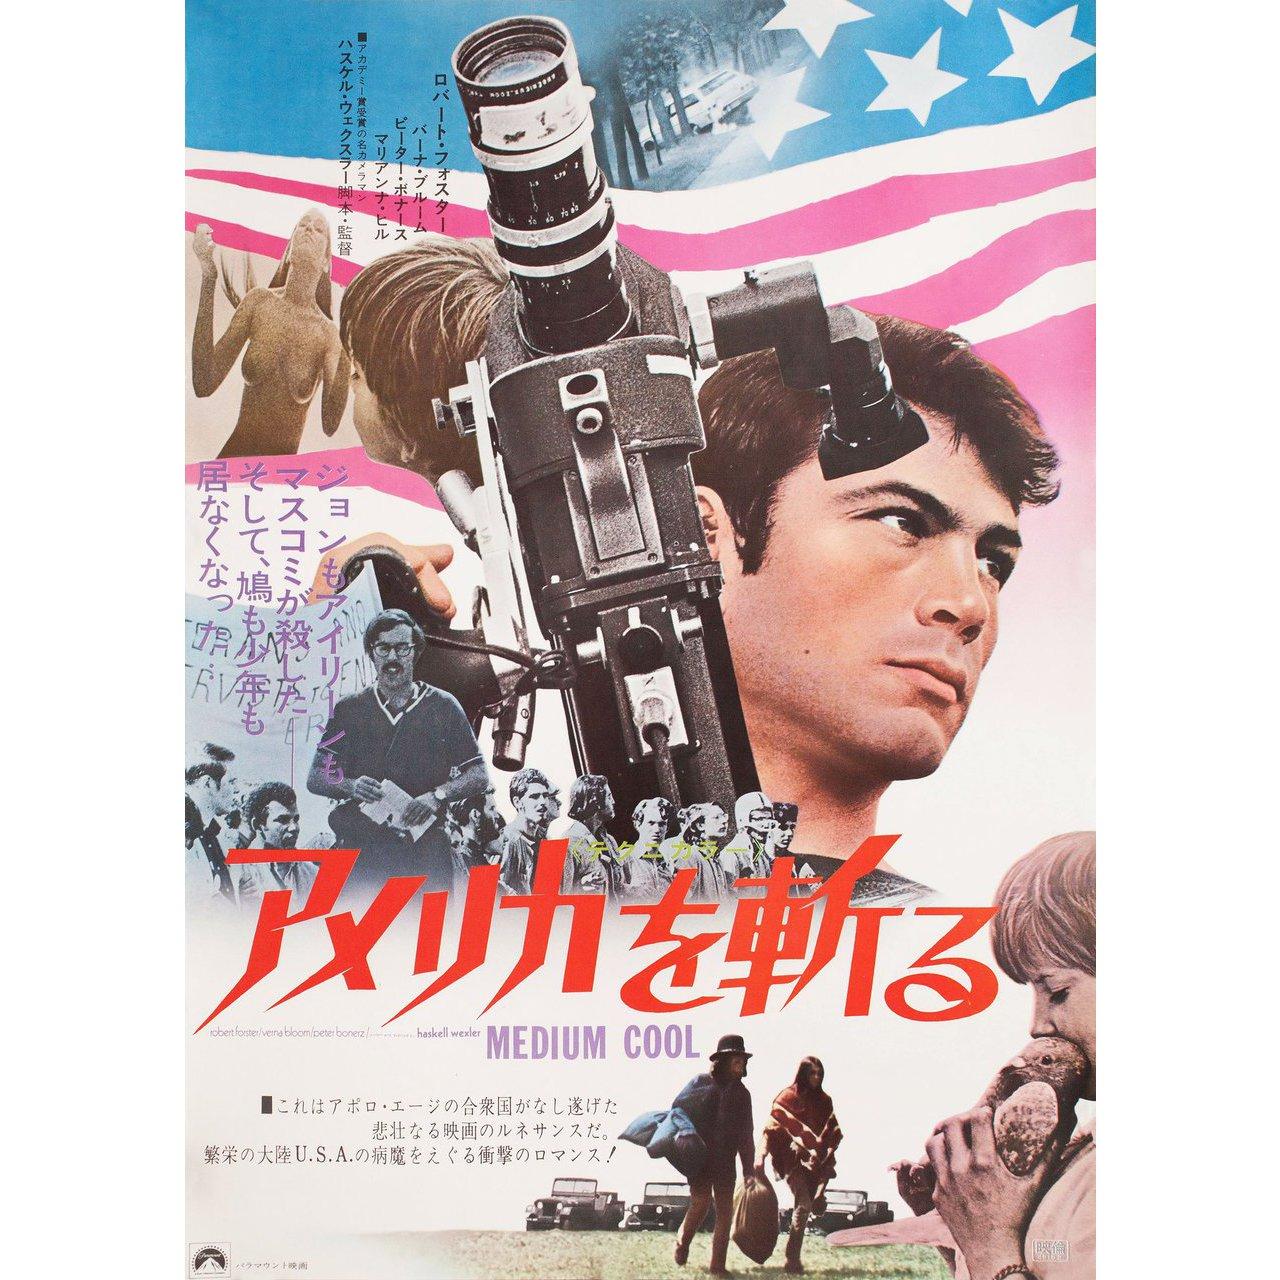 Original 1970 Japanese B2 poster for the film Medium Cool directed by Haskell Wexler with Robert Forster / Verna Bloom / Peter Bonerz / Marianna Hill. Fine condition, rolled. Please note: the size is stated in inches and the actual size can vary by